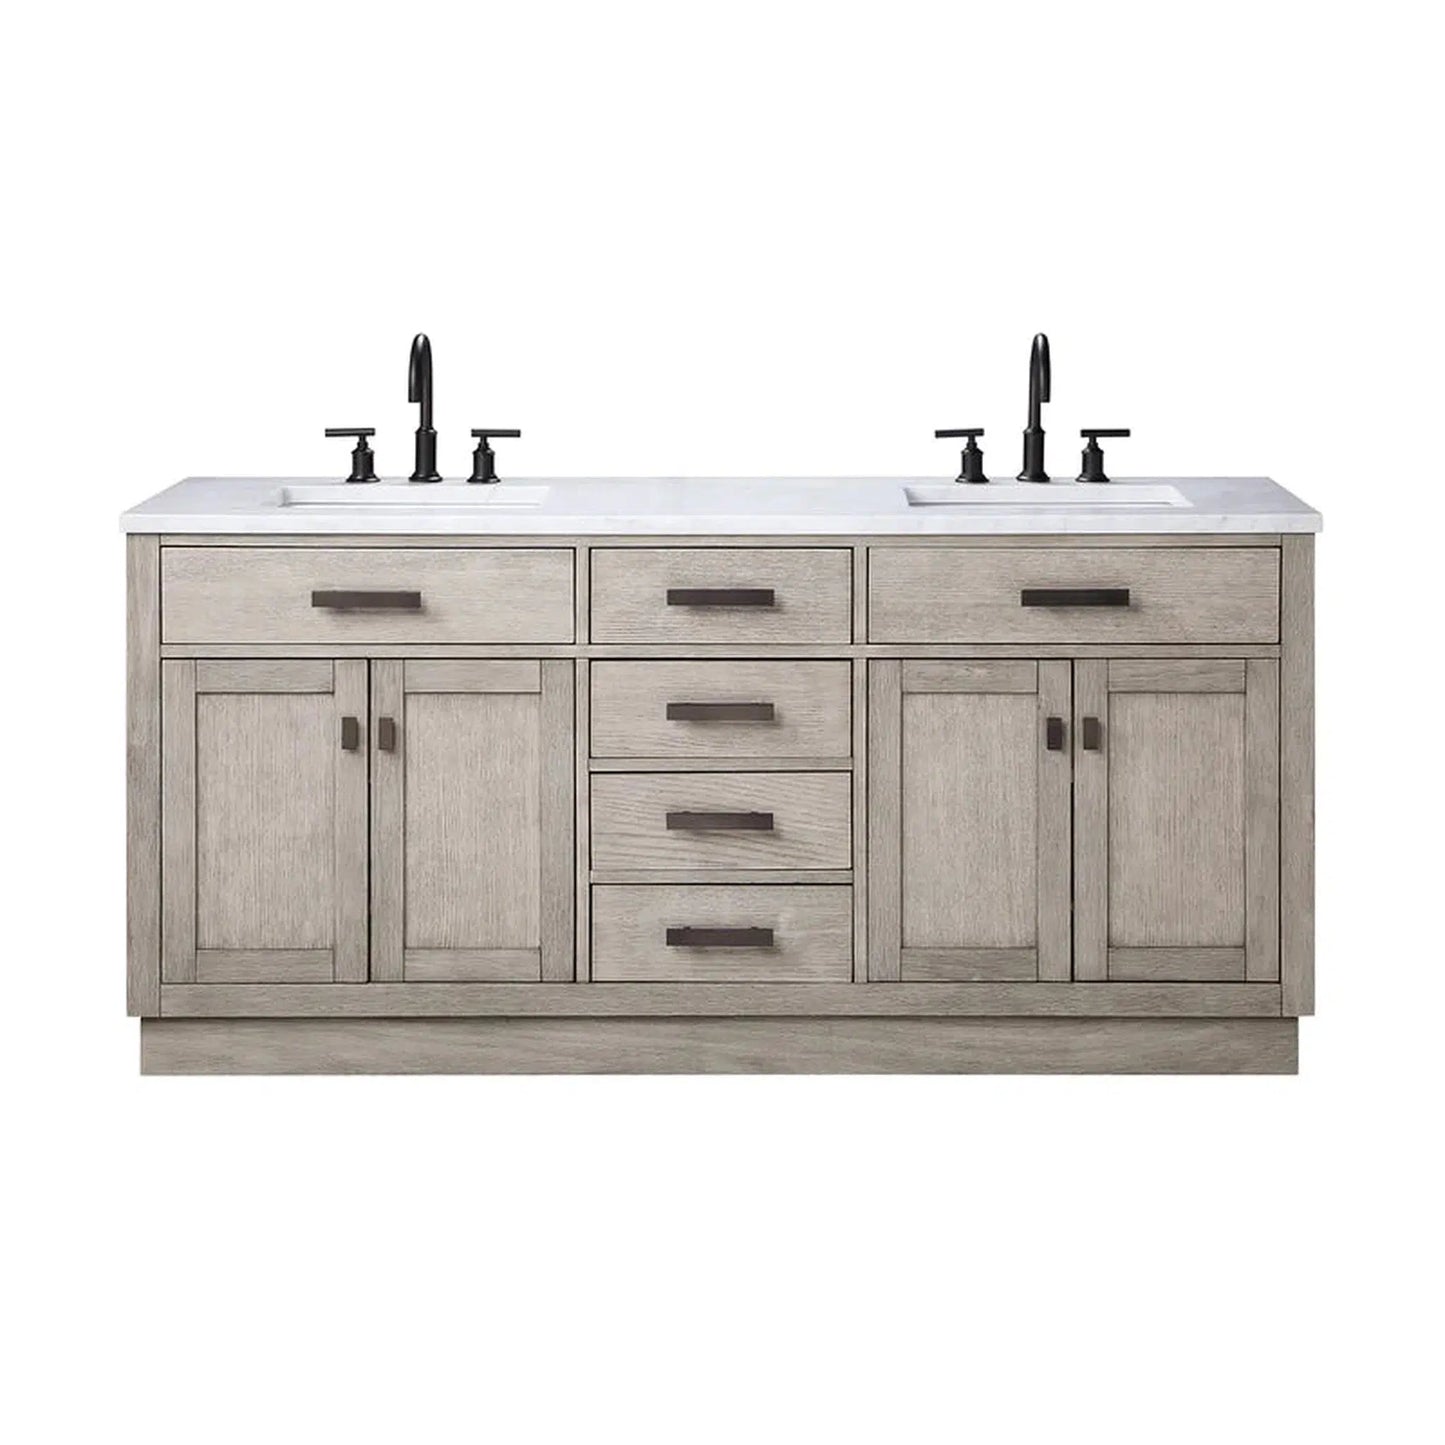 Water Creation Chestnut 72" Double Sink Carrara White Marble Countertop Vanity In Grey Oak with Grooseneck Faucets